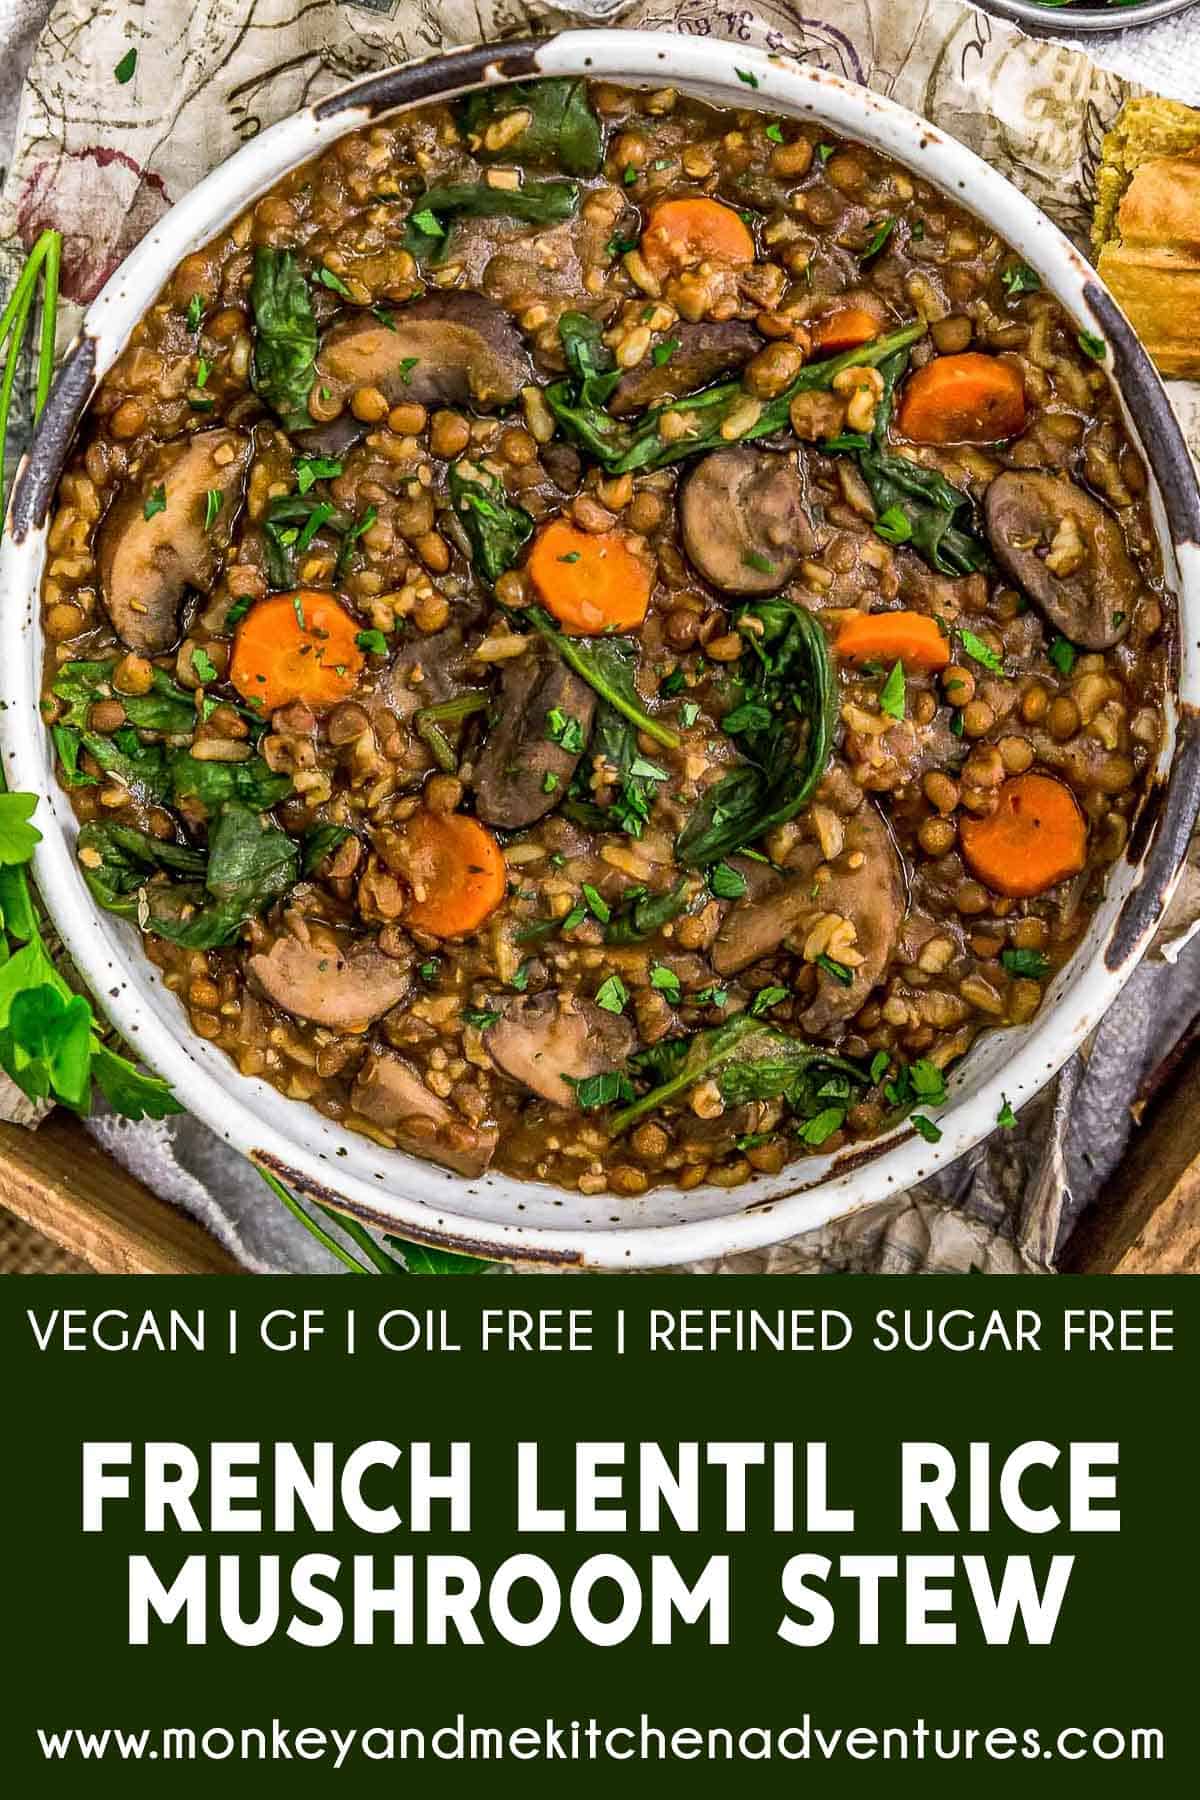 French Lentil Rice Mushroom Stew with text description